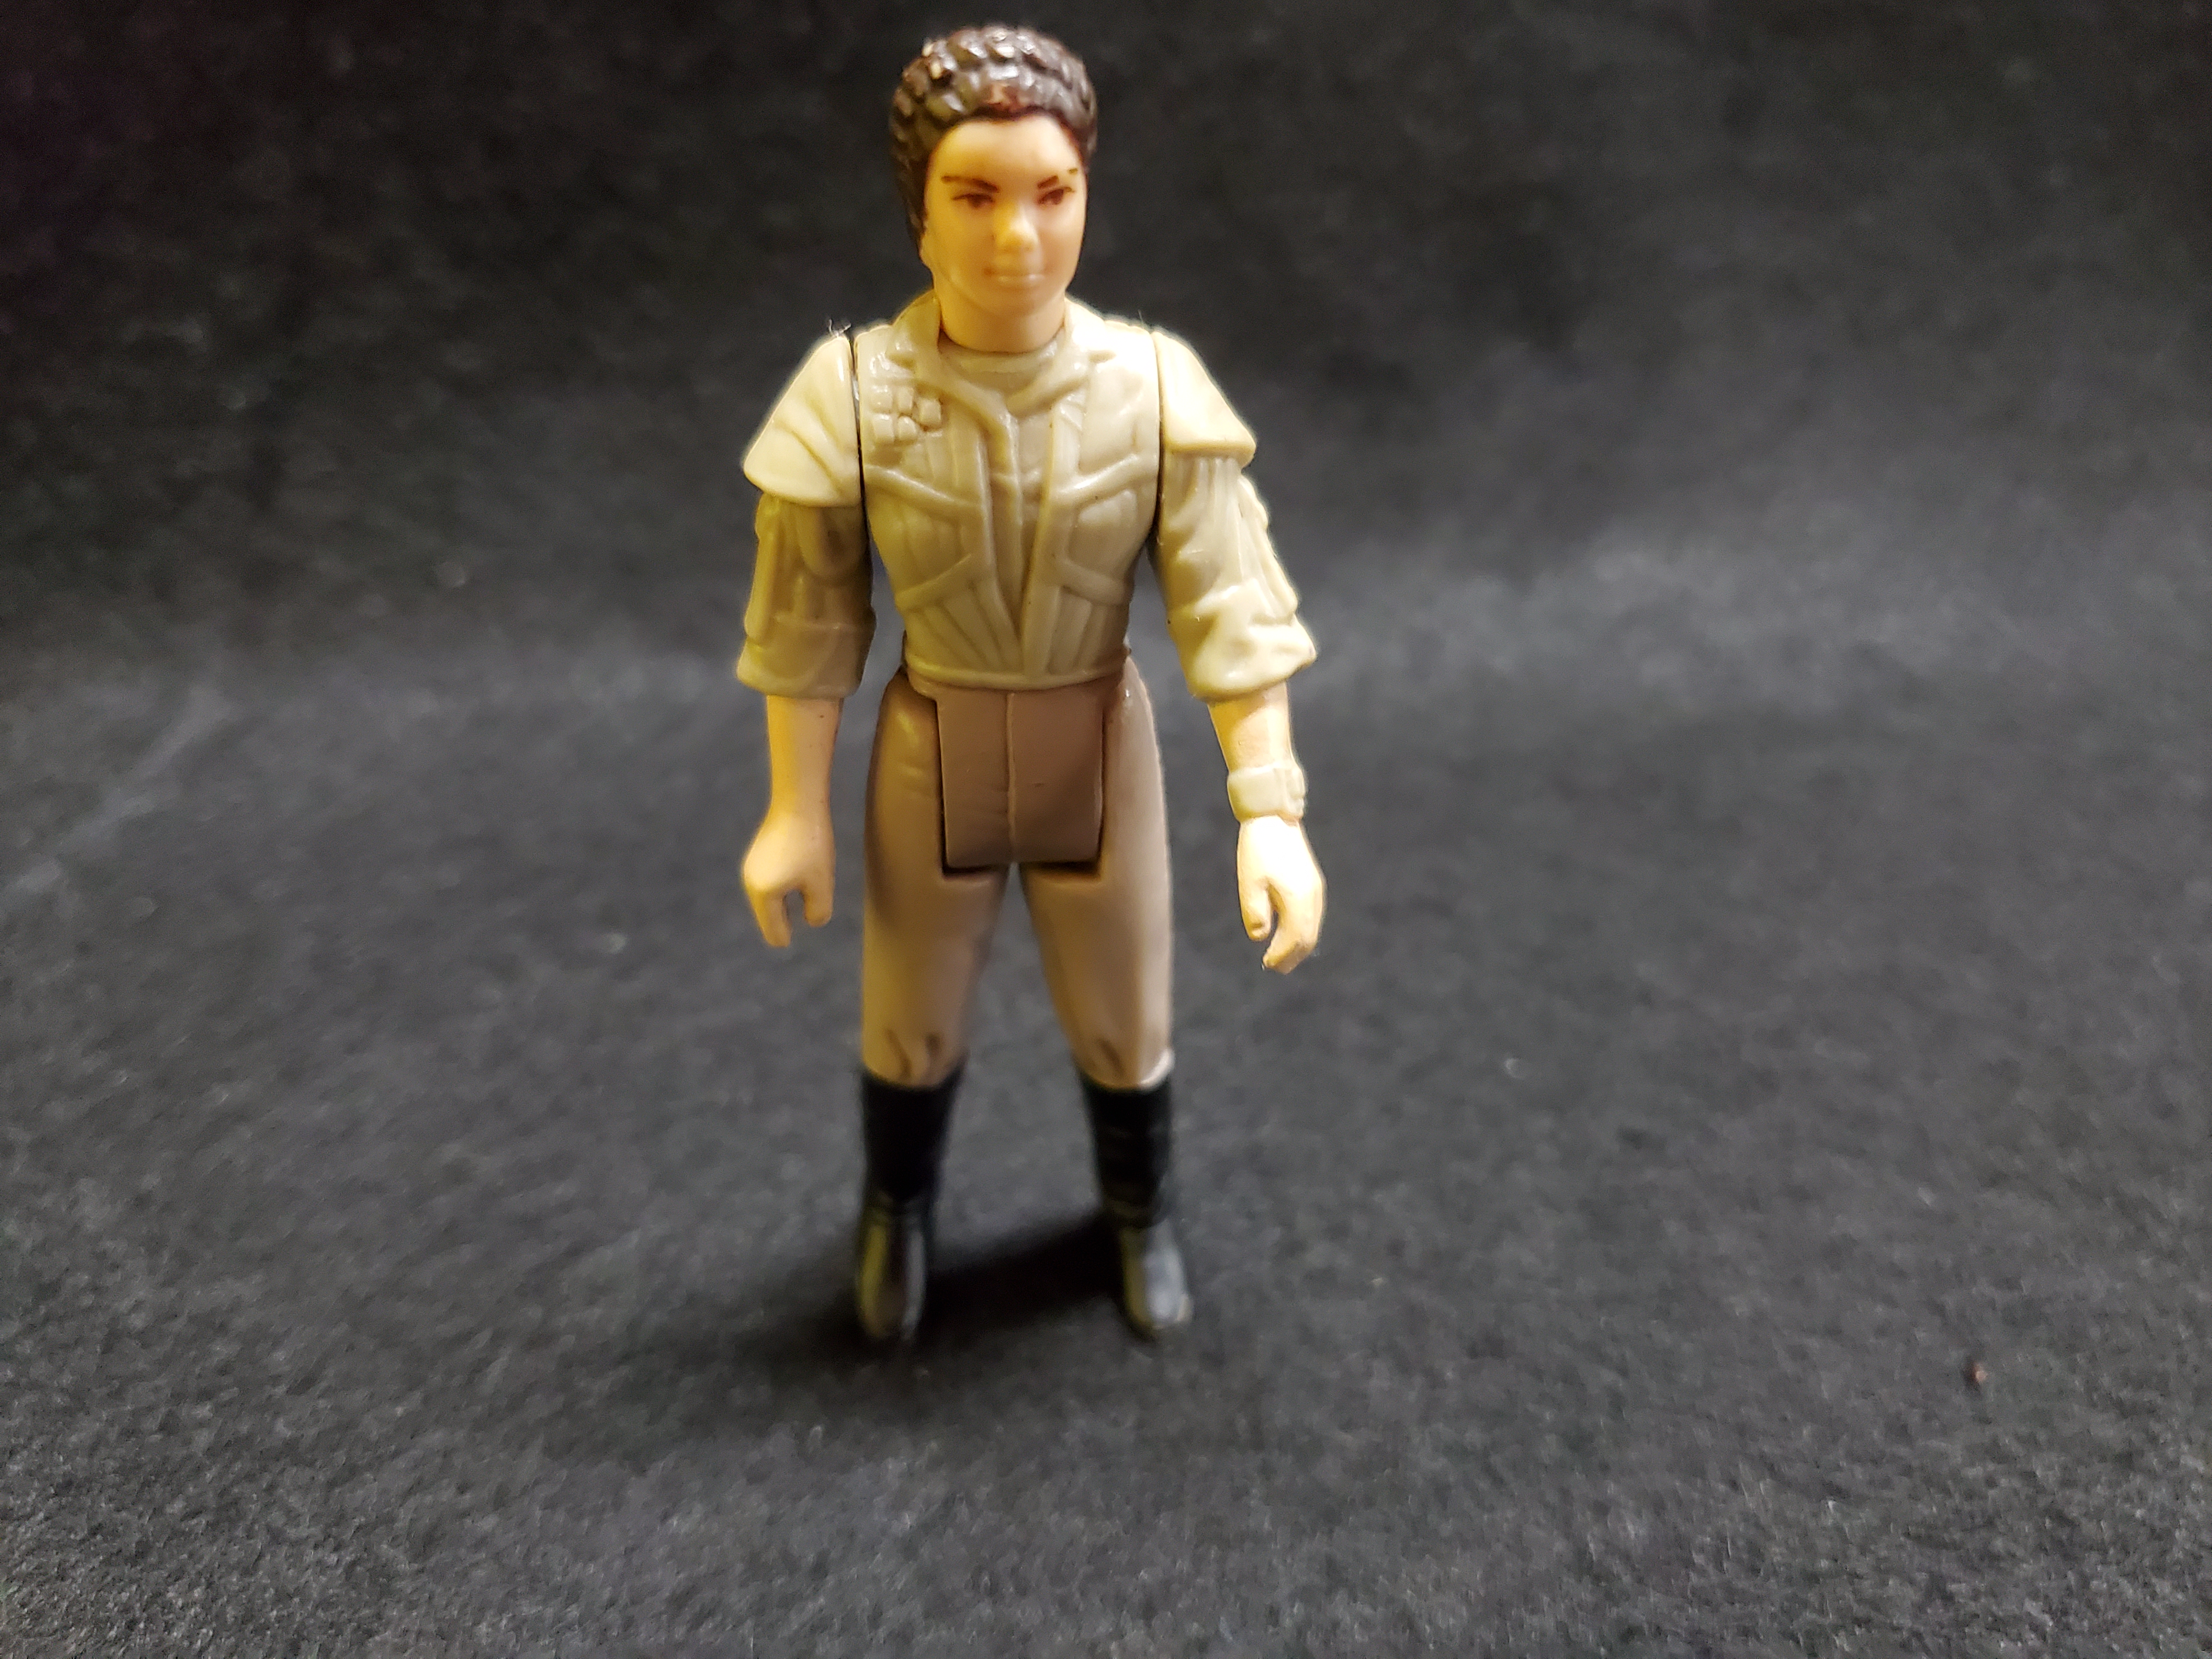 Star Wars 1984 Princess Leia Organa (Endor) Incomplete Action Figure (C) Pre-Owned